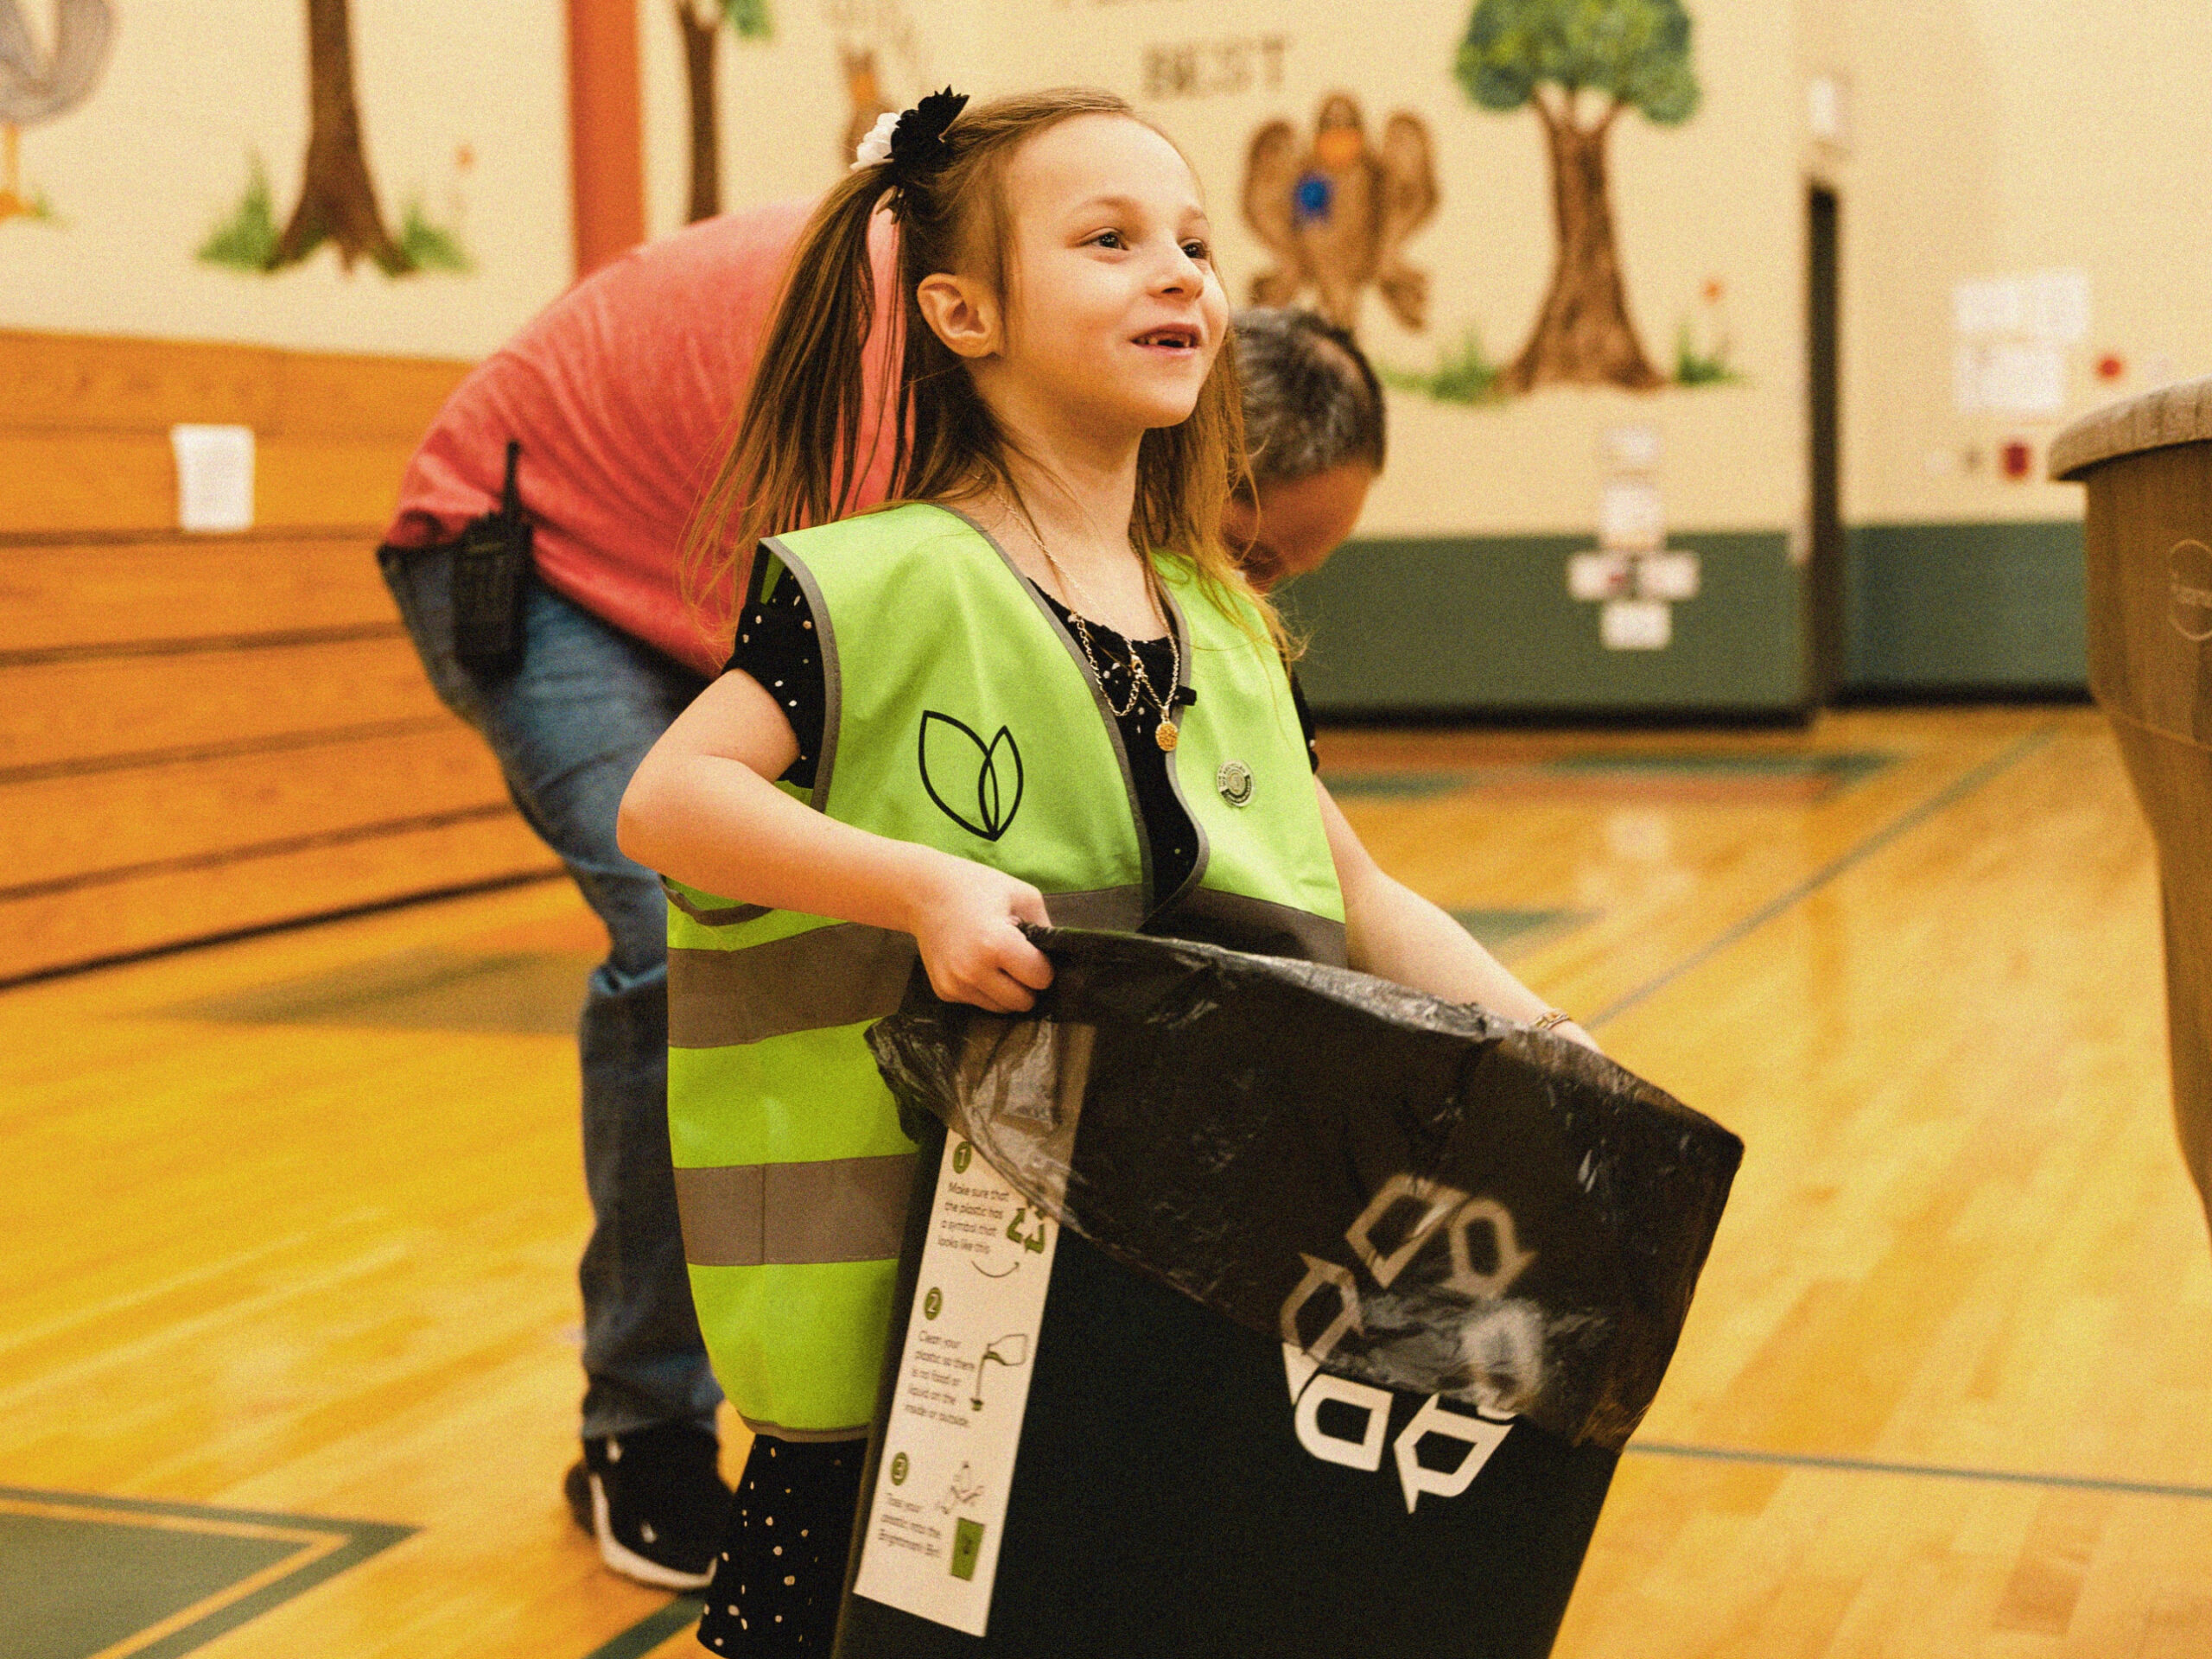 Young girl wearing a Brightmark safety vest and carrying a recycling bin.